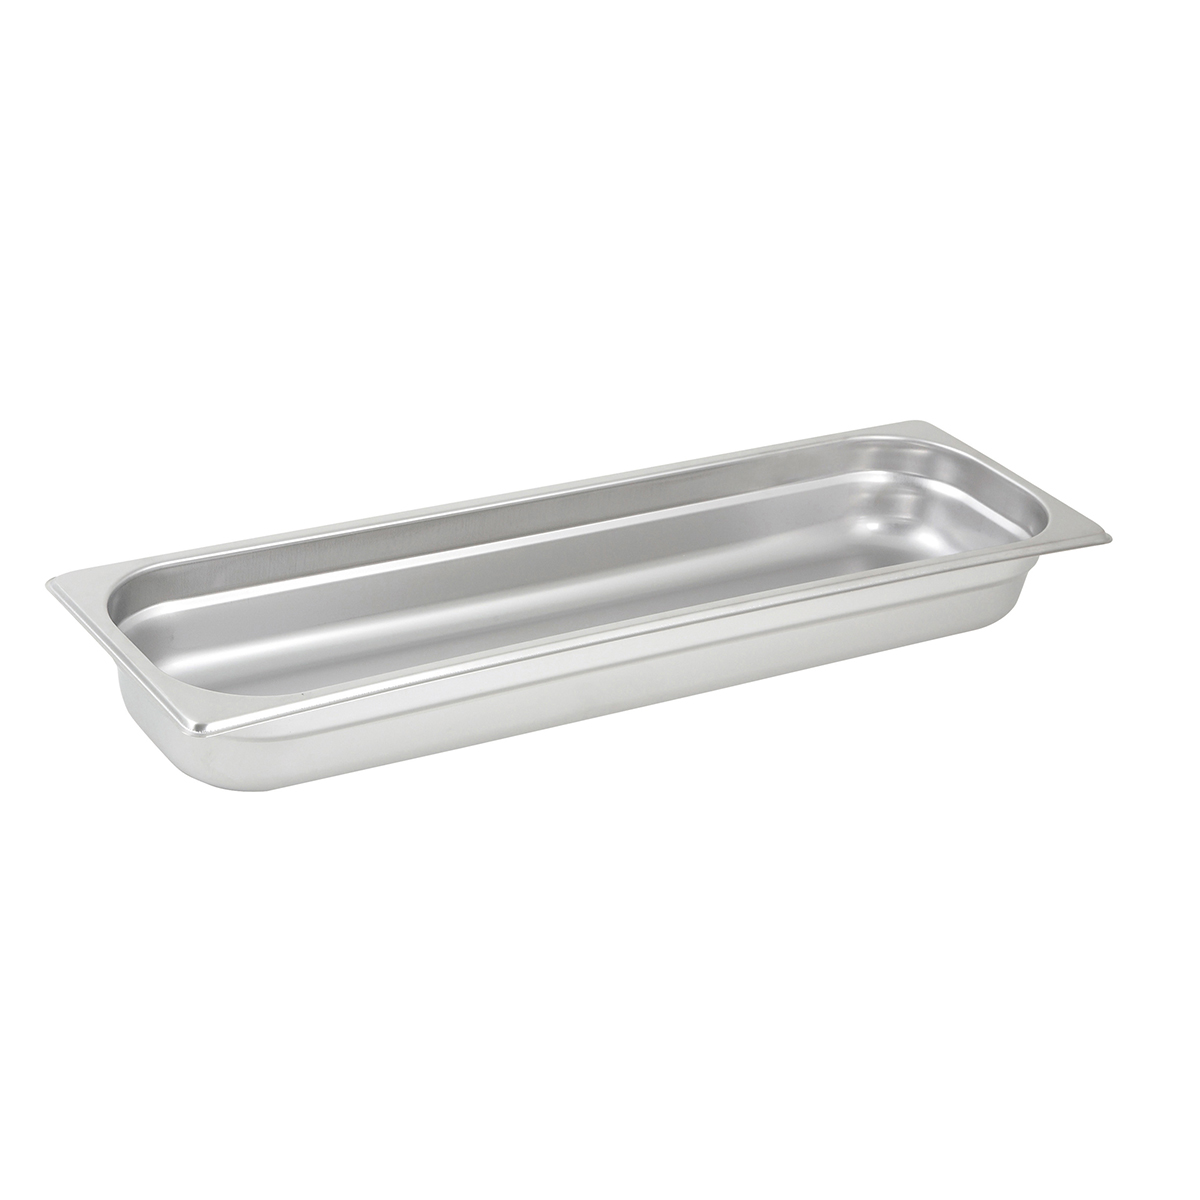 Steam-Table Pan, Stainless, Half Size Long (6" x 20") x 2-1/2"